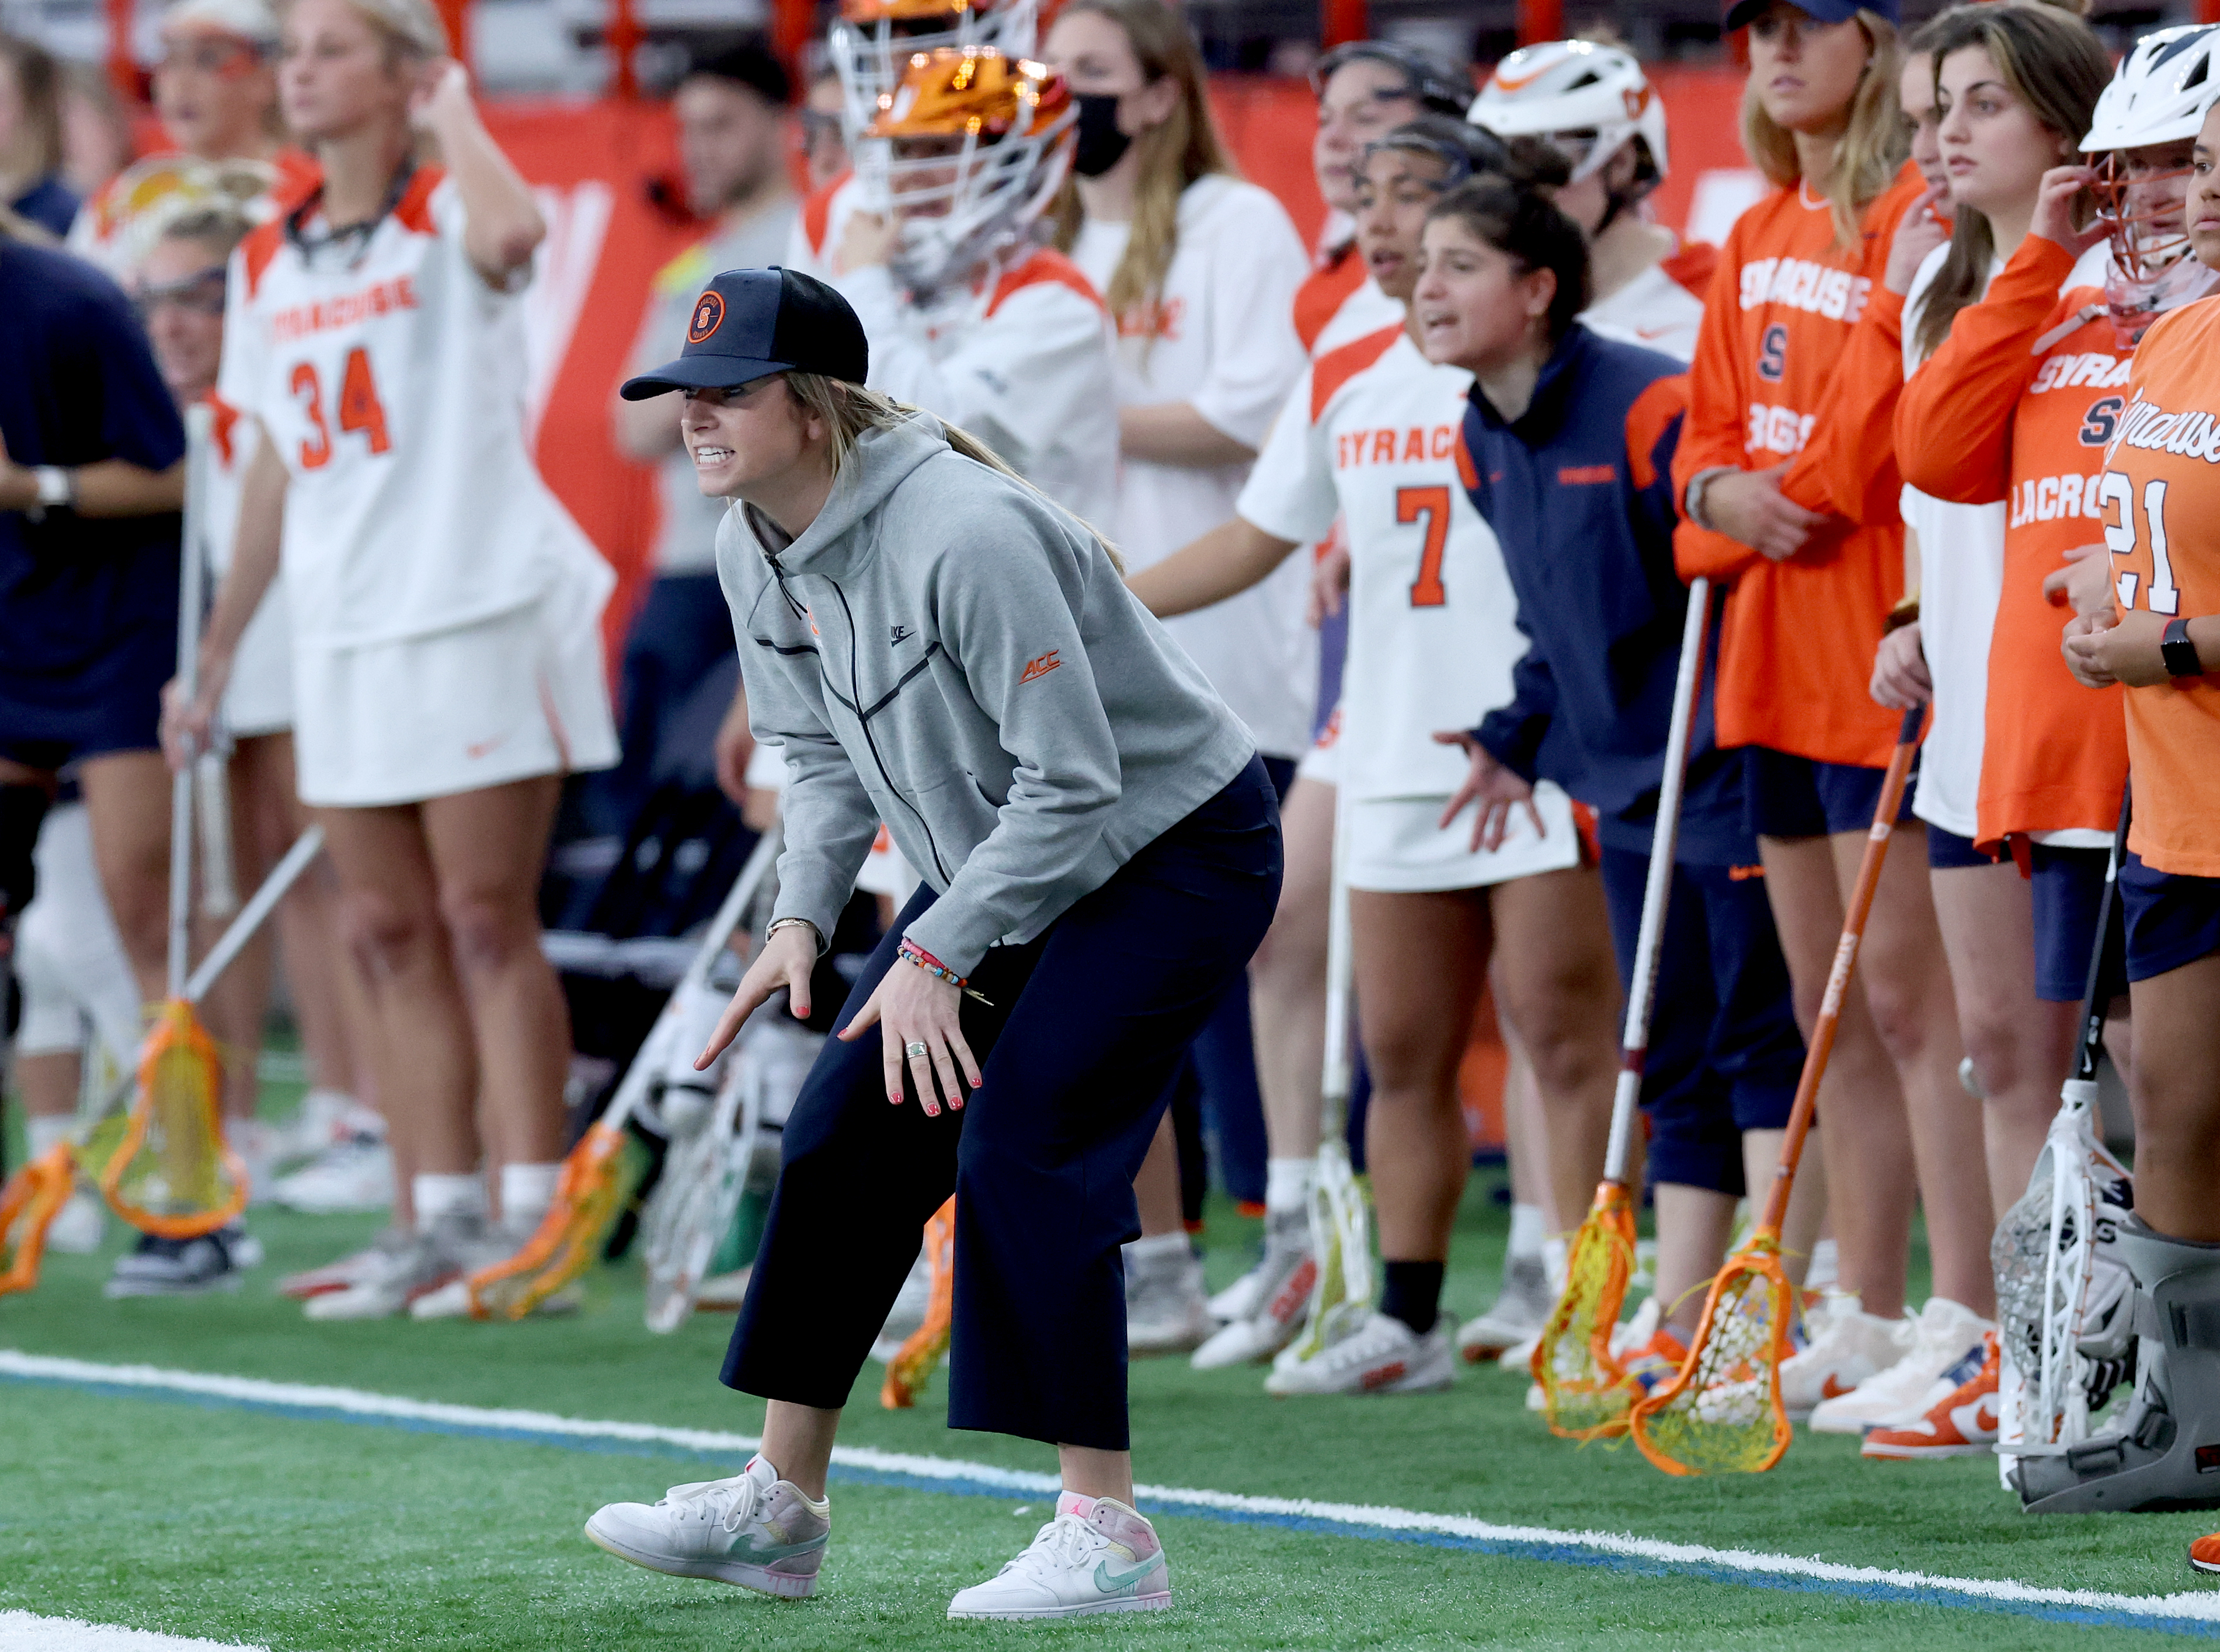 Kayla Treanor retiring from . national team to focus on coaching  Syracuse women's lacrosse (report) 